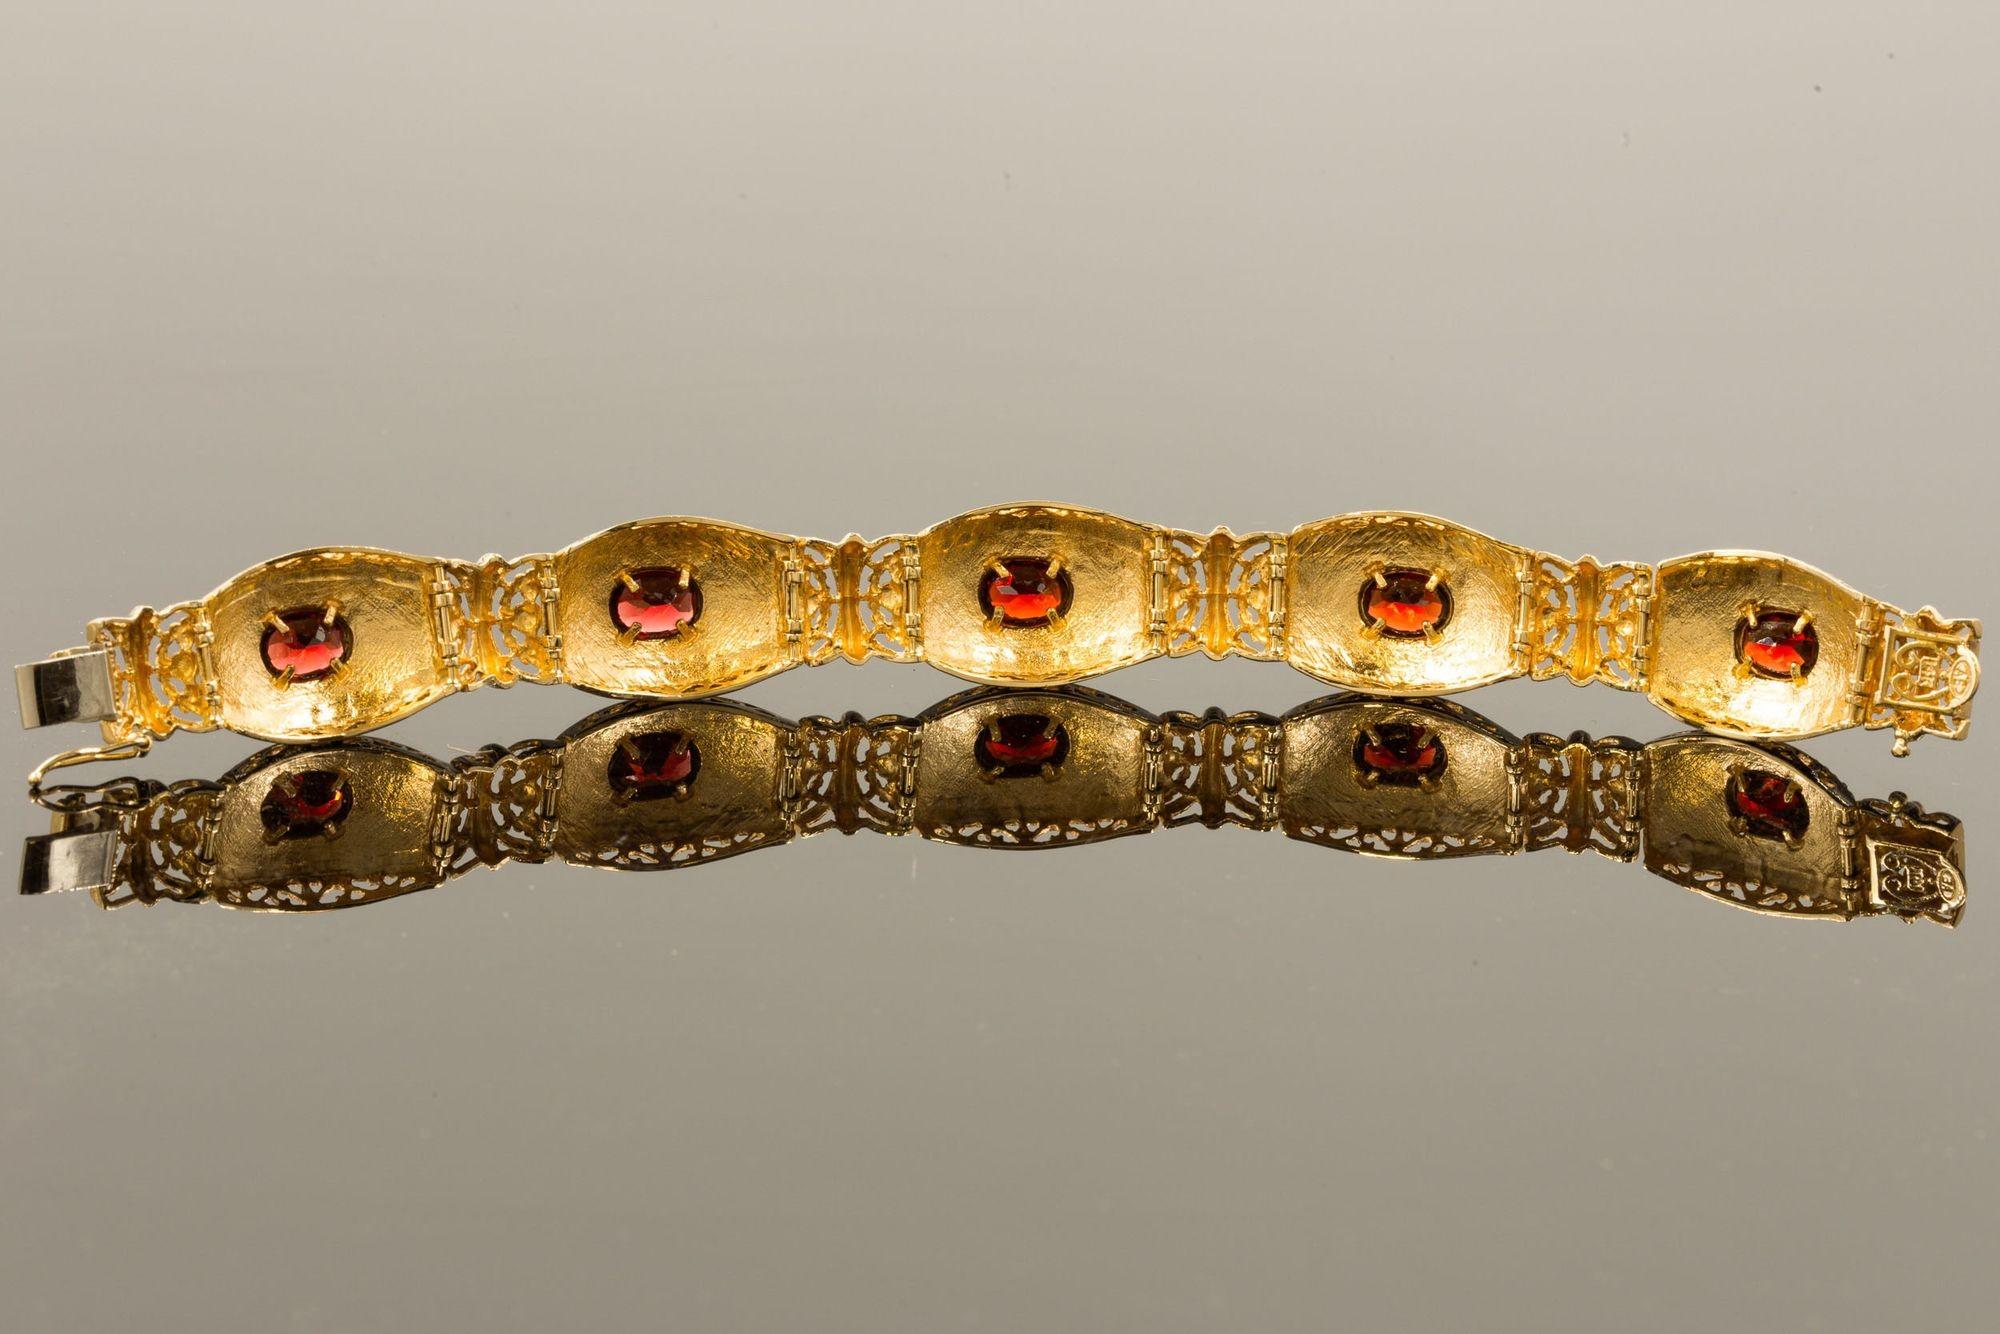 Vintage Etruscan Revival Style 14k Yellow Gold and Garnet Bracelet In Good Condition For Sale In Shippensburg, PA